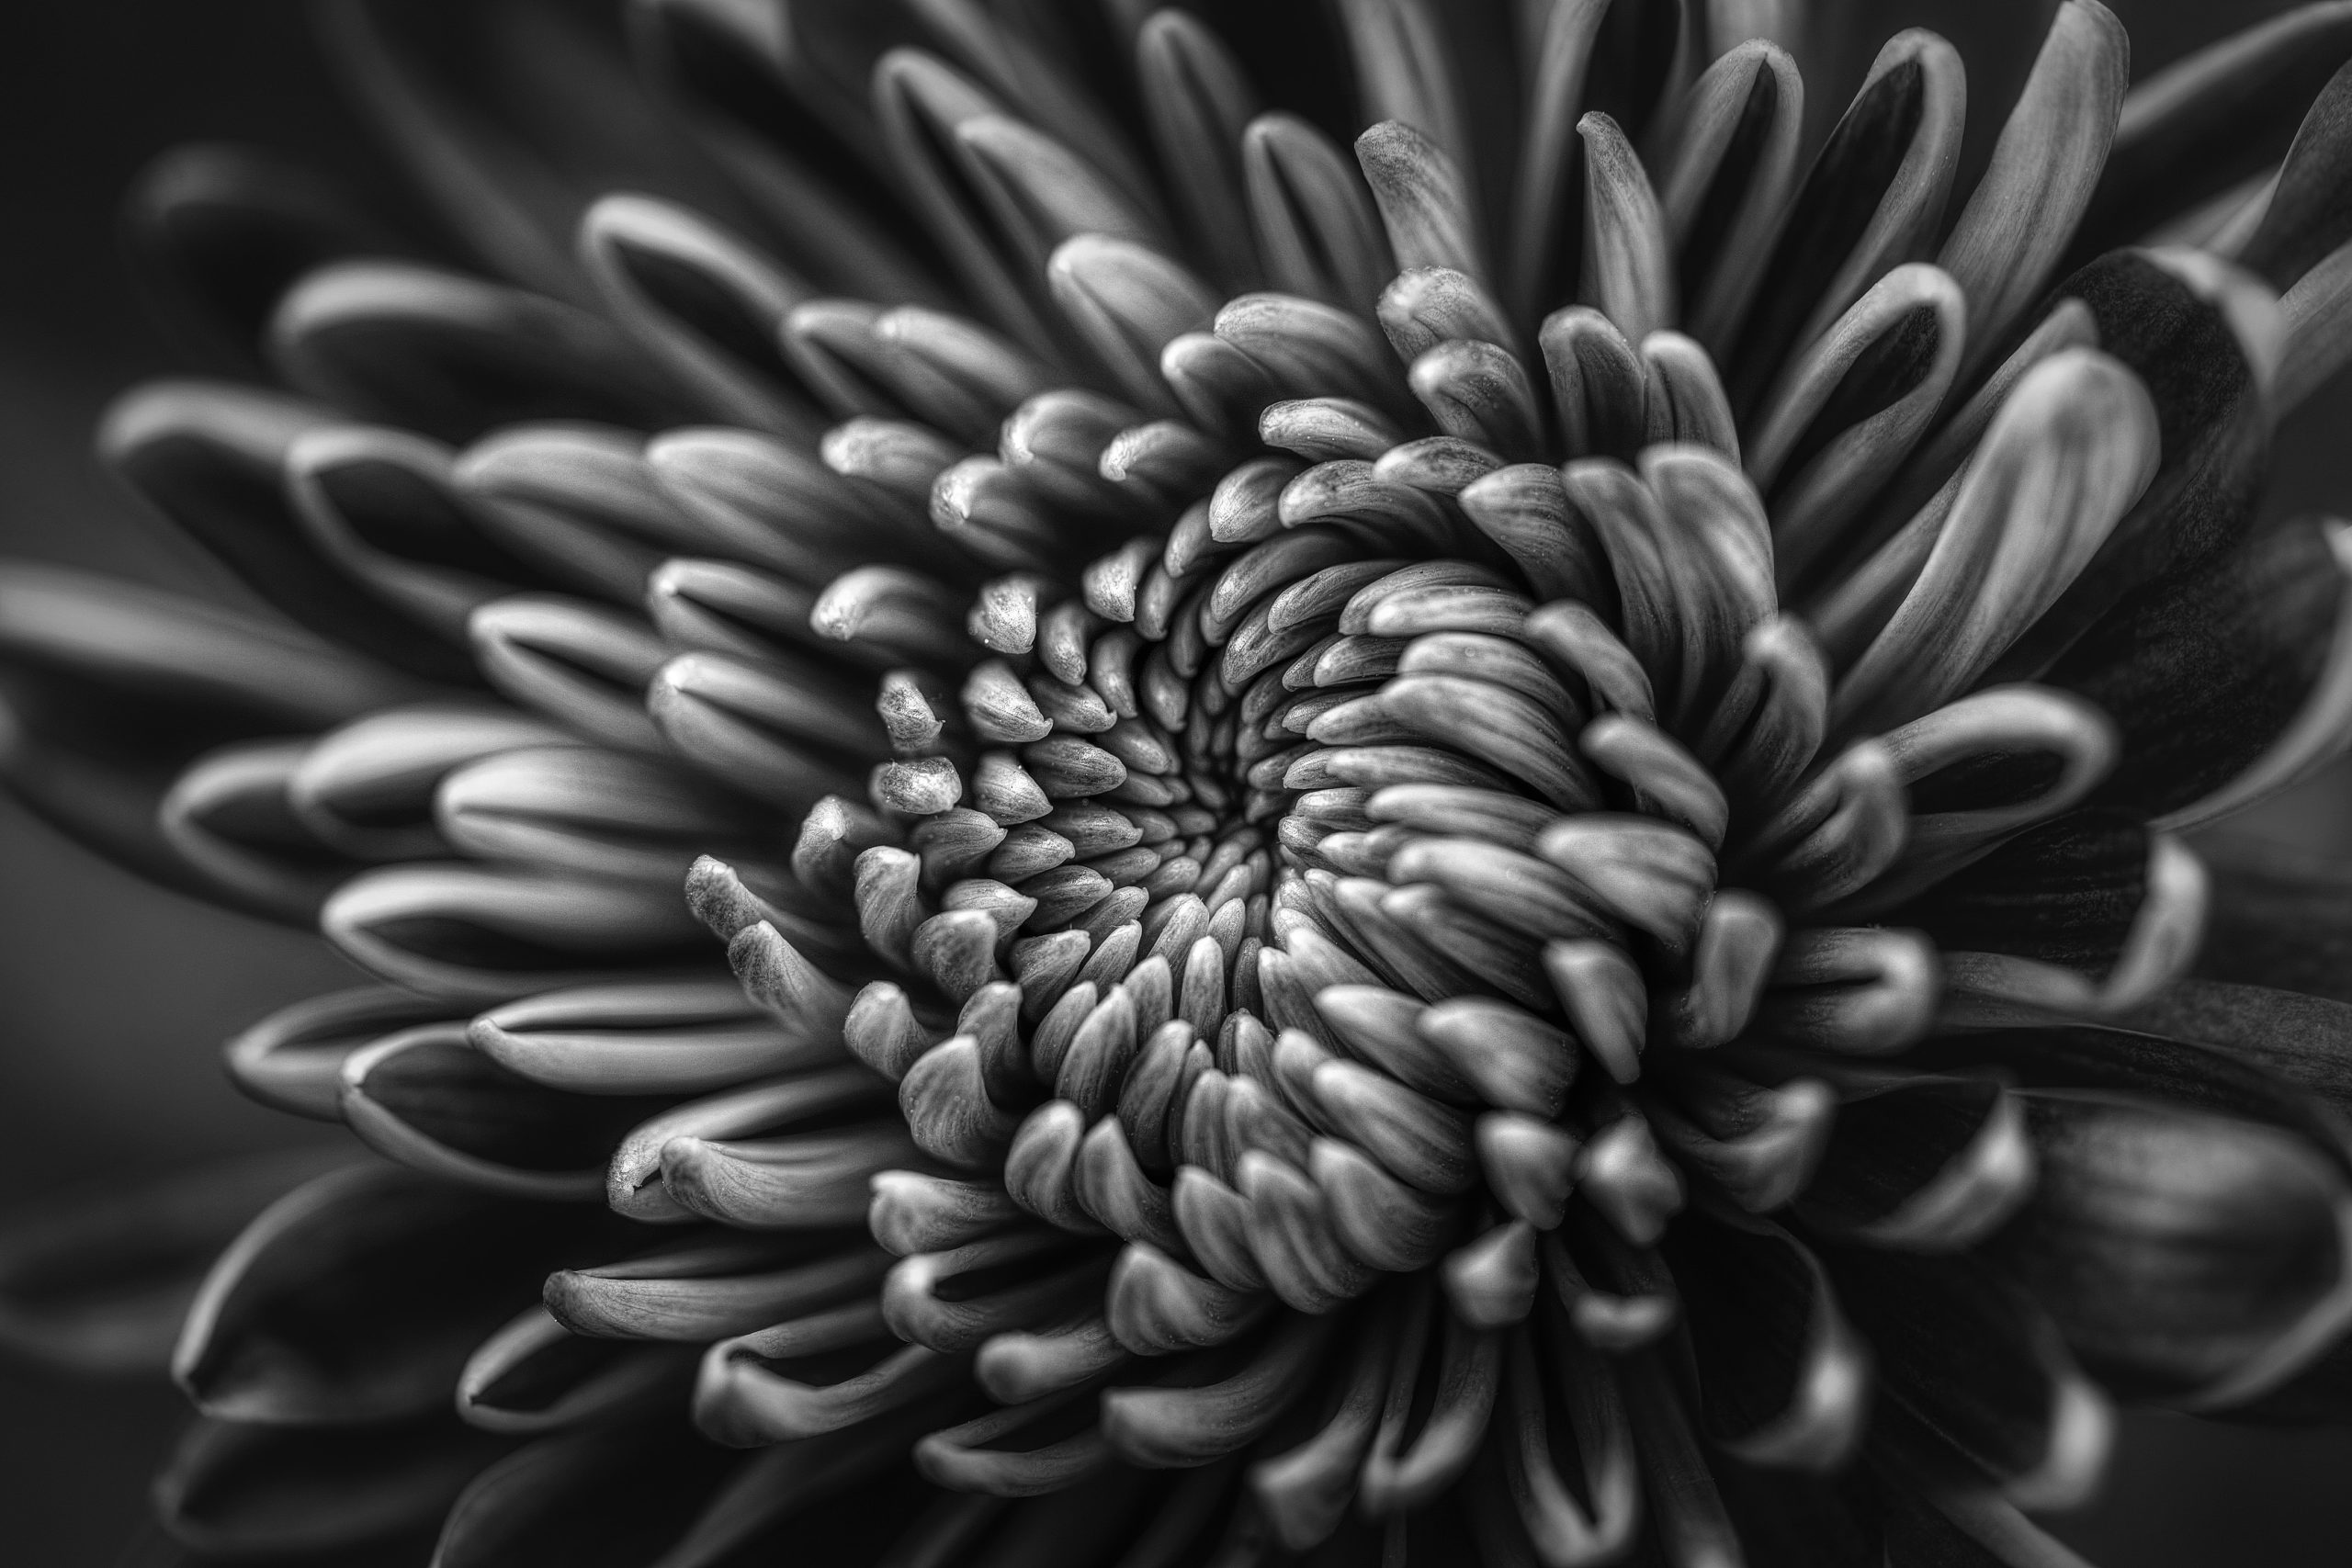 A flower blooming in black and white